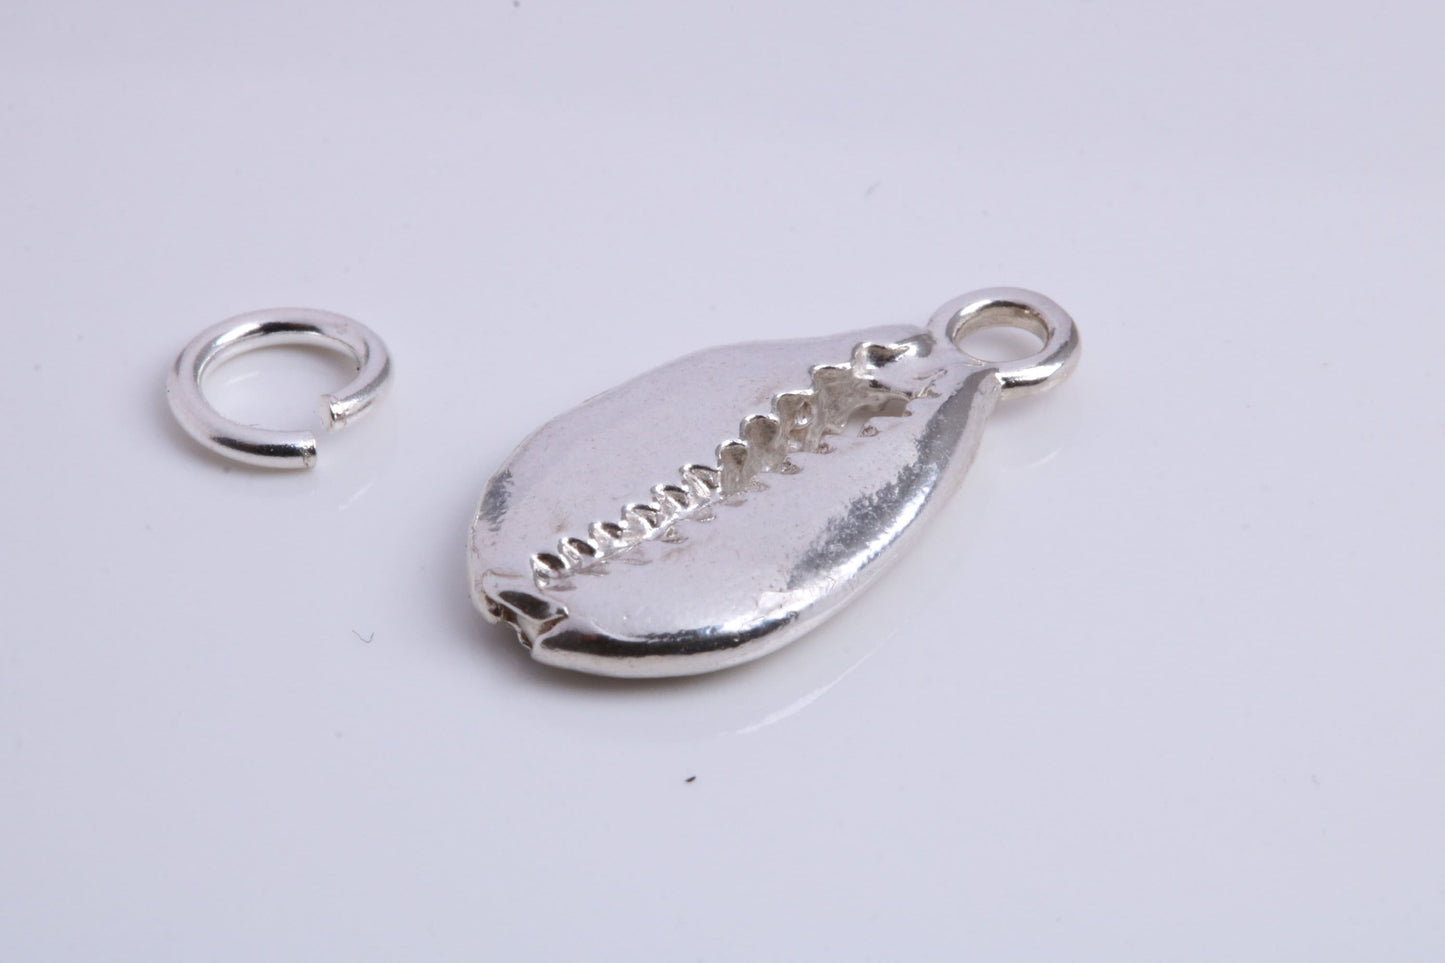 Shark Jaw Charm, Traditional Charm, Made from Solid 925 Grade Sterling Silver, Complete with Attachment Link